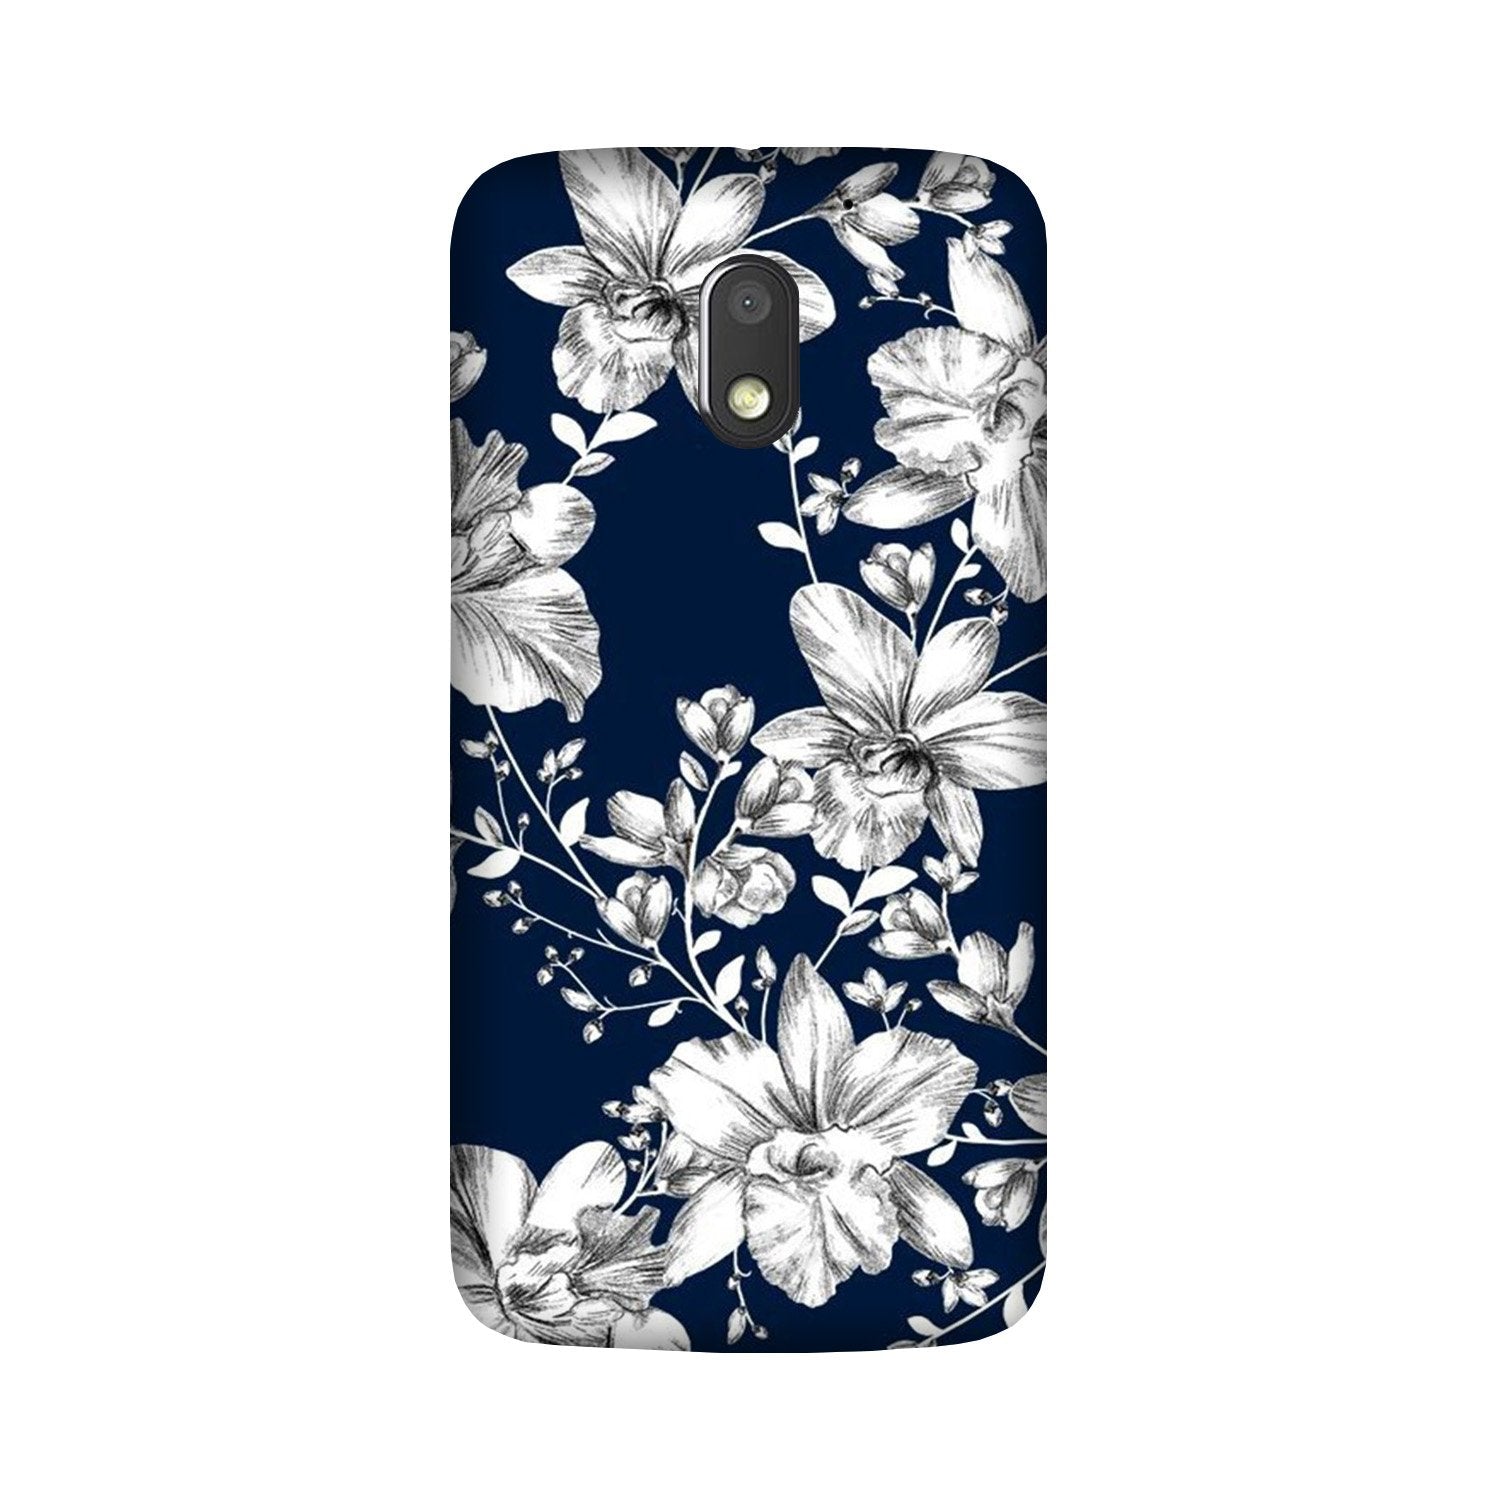 White flowers Blue Background Case for Moto G4 Play